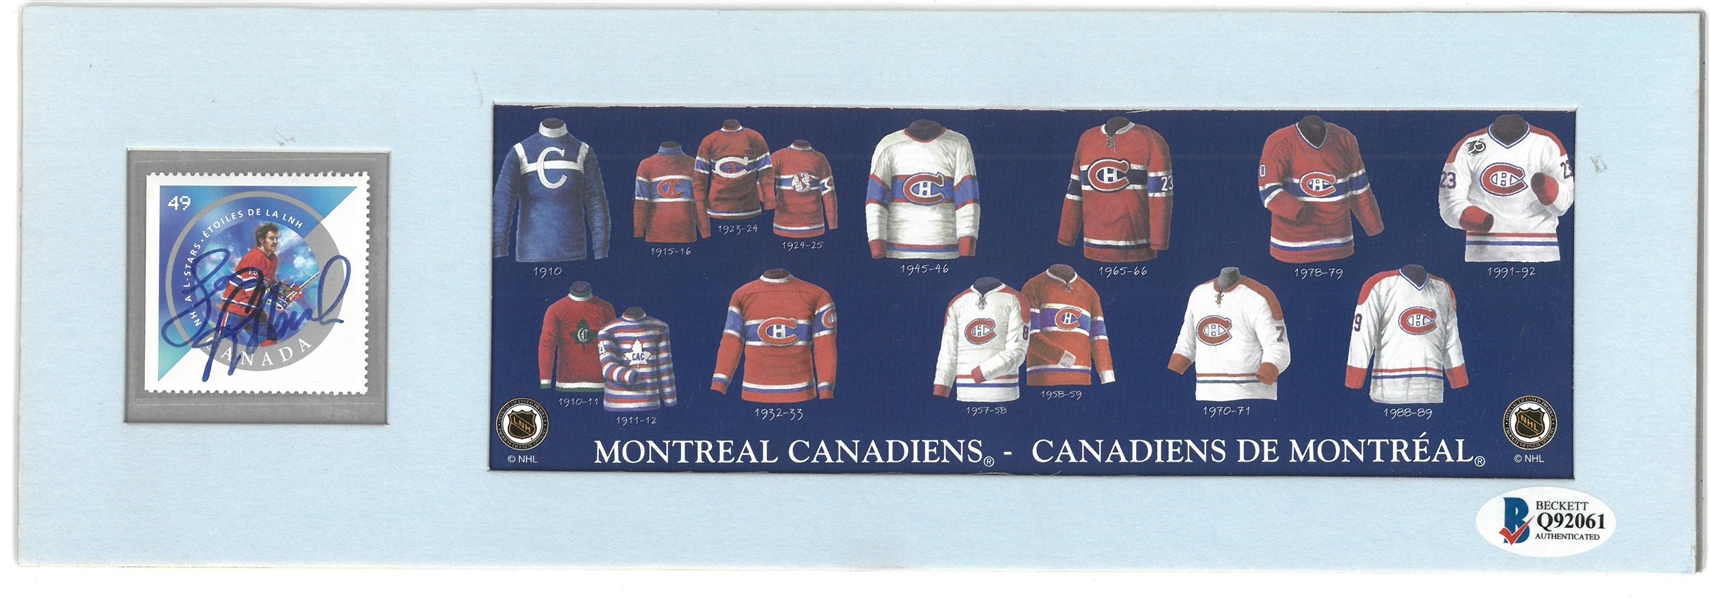 Larry Robinson Autographed 4x12 Canada Post Piece